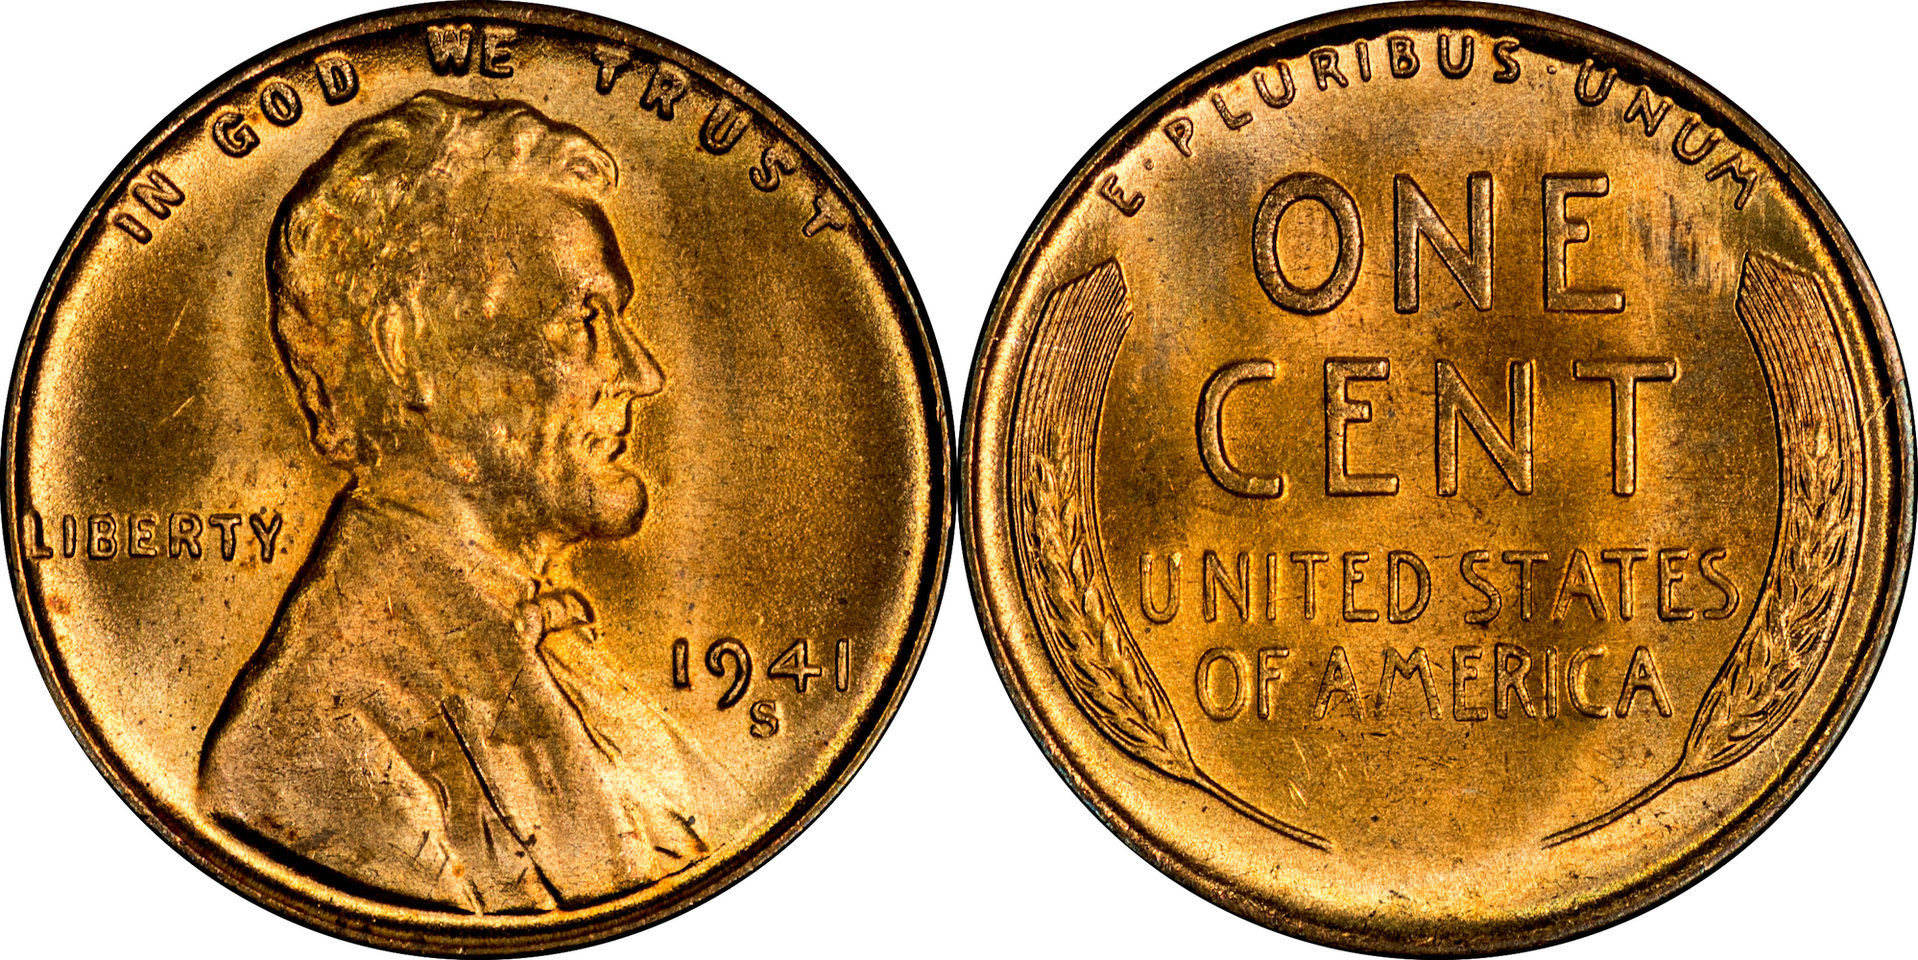 1941 S Lincoln Cent Large S.jpg